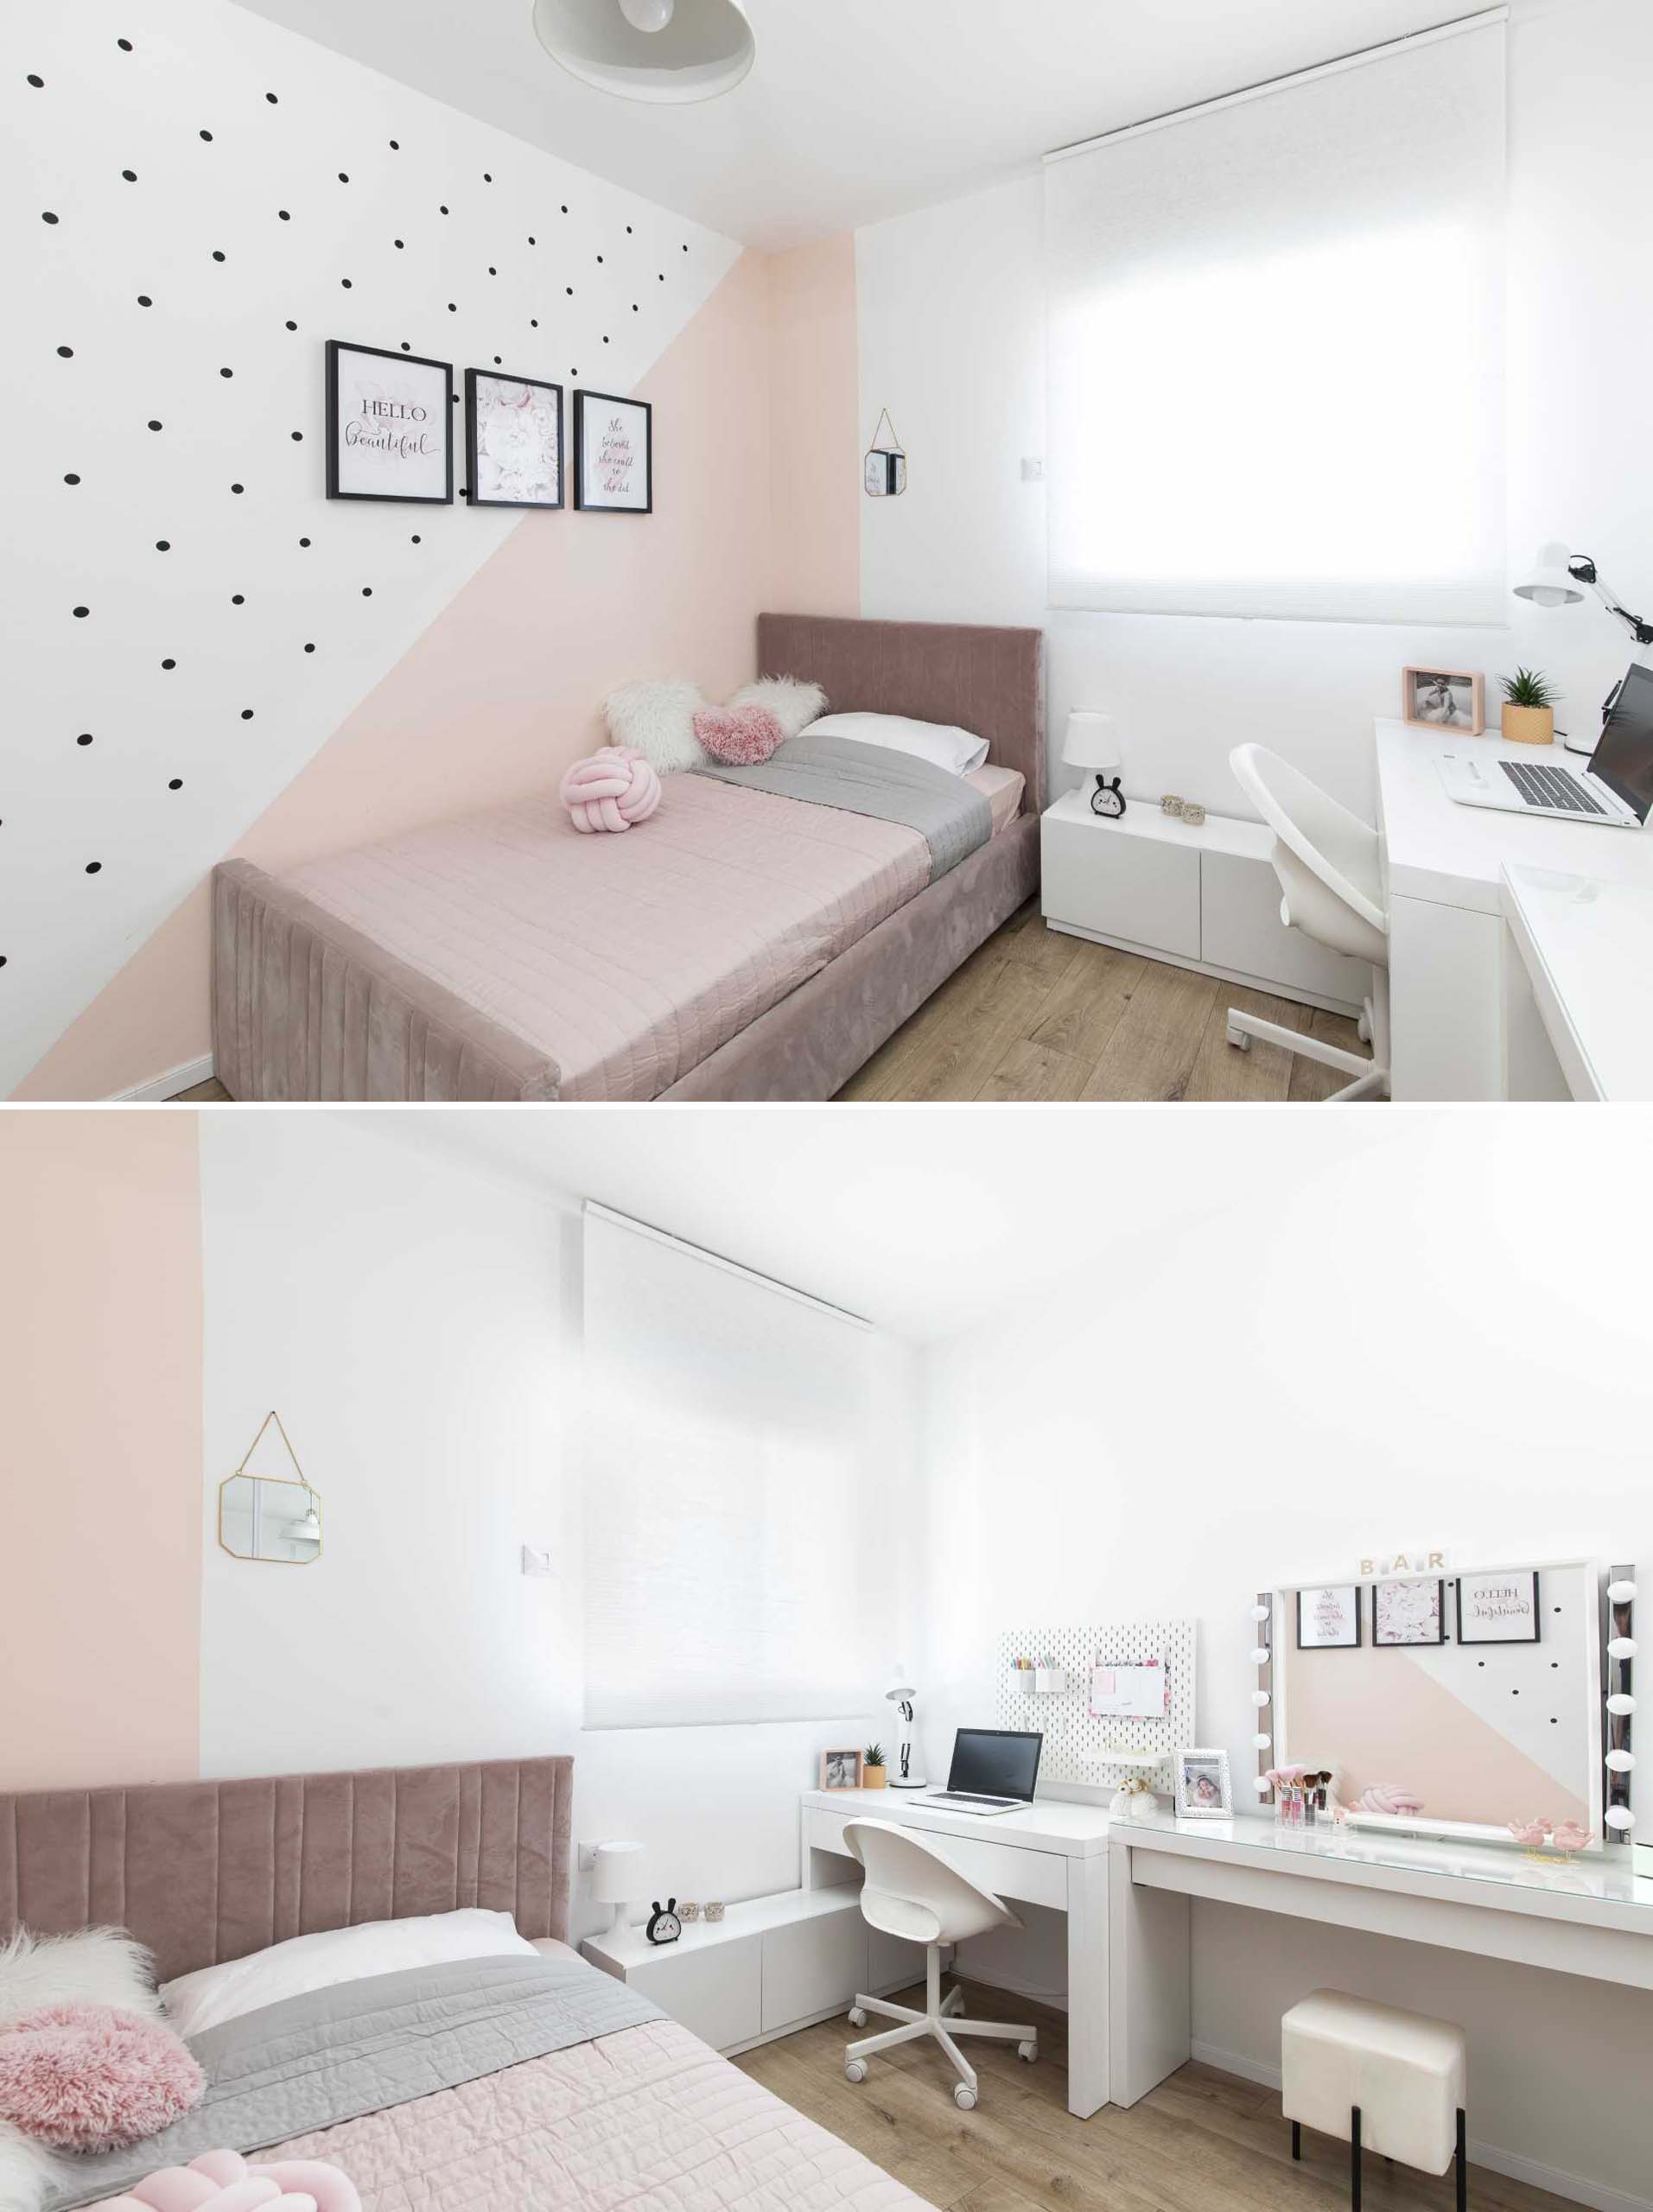 In this teenage girl's bedroom, her wishes were granted, a large bed, a place to study, a makeup table and a wardrobe, while the use of paint, stickers, and art created elegant design on the wall.